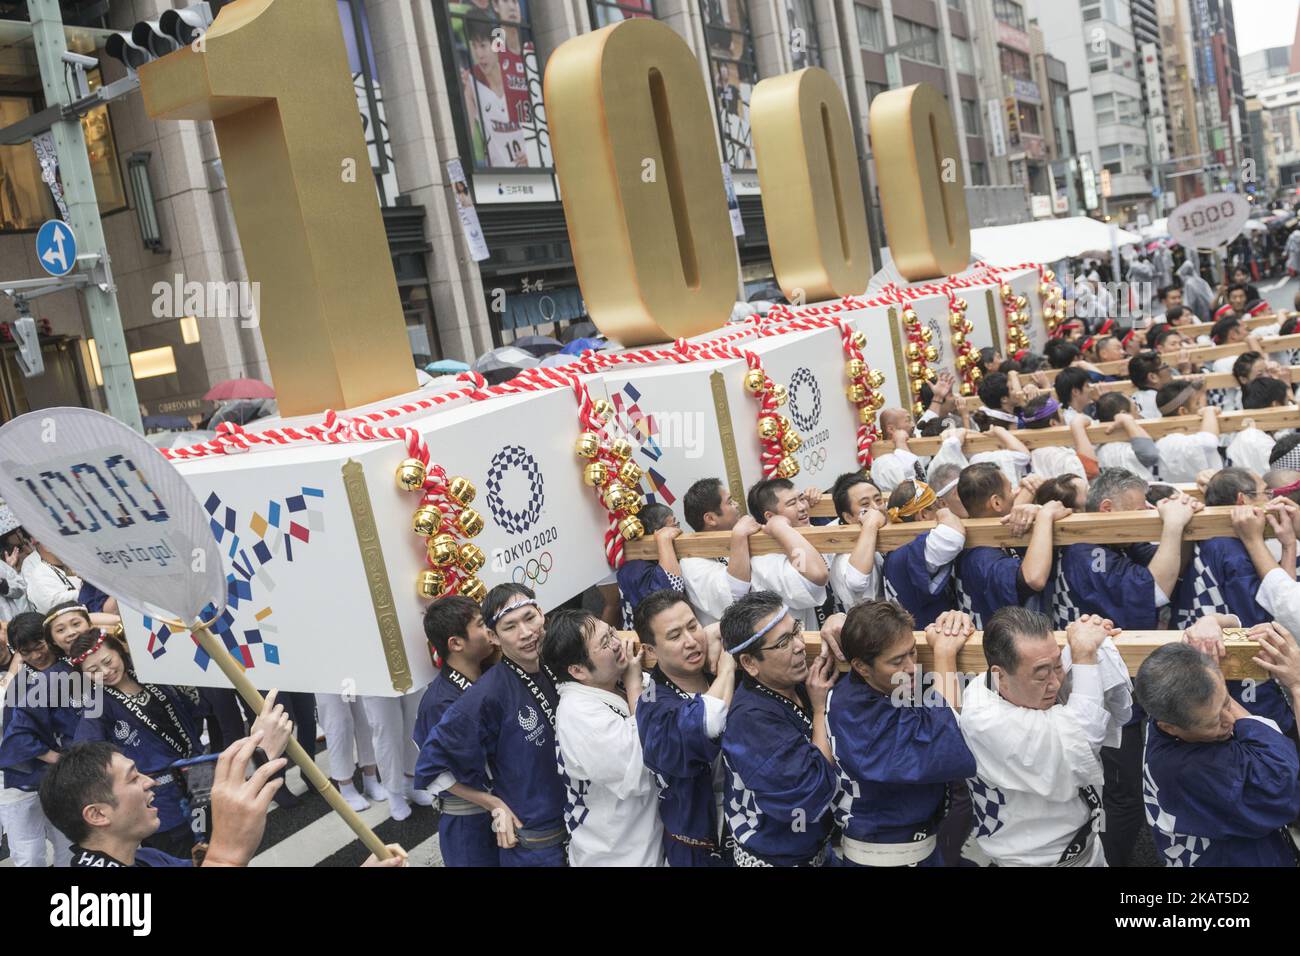 Participants carry portable floats featuring number of 1,000 as they attend the countdown ceremony to mark 1,000 days until the 2020 Tokyo Olympic Games in Tokyo, Japan October 28, 2017.Â (Photo by Alessandro Di Ciommo/NurPhoto) Stock Photo